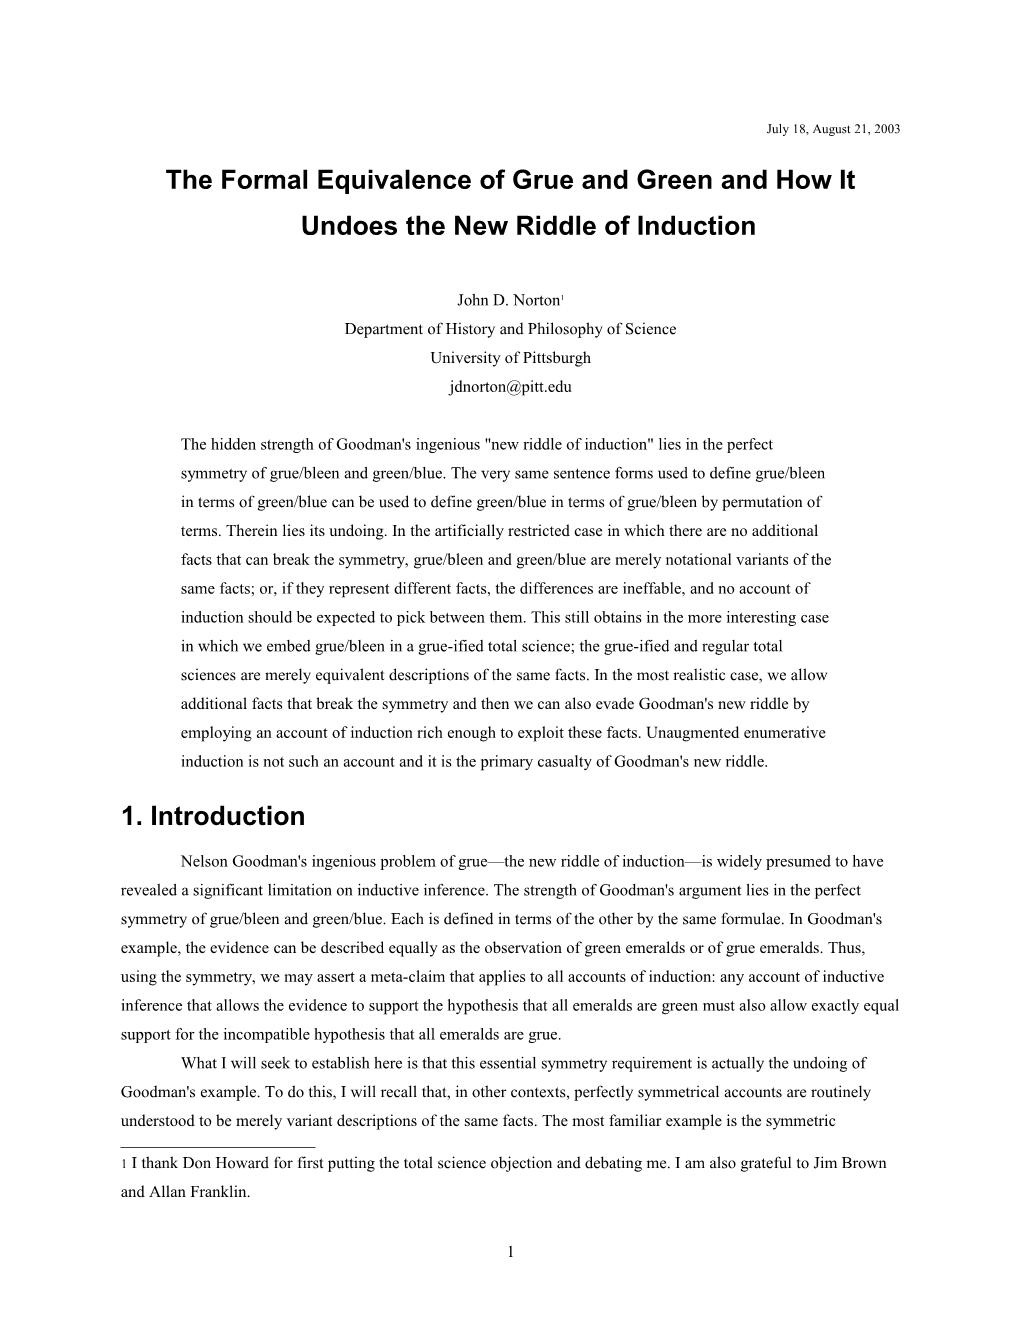 On the Formal Equivalence of Grue and Green